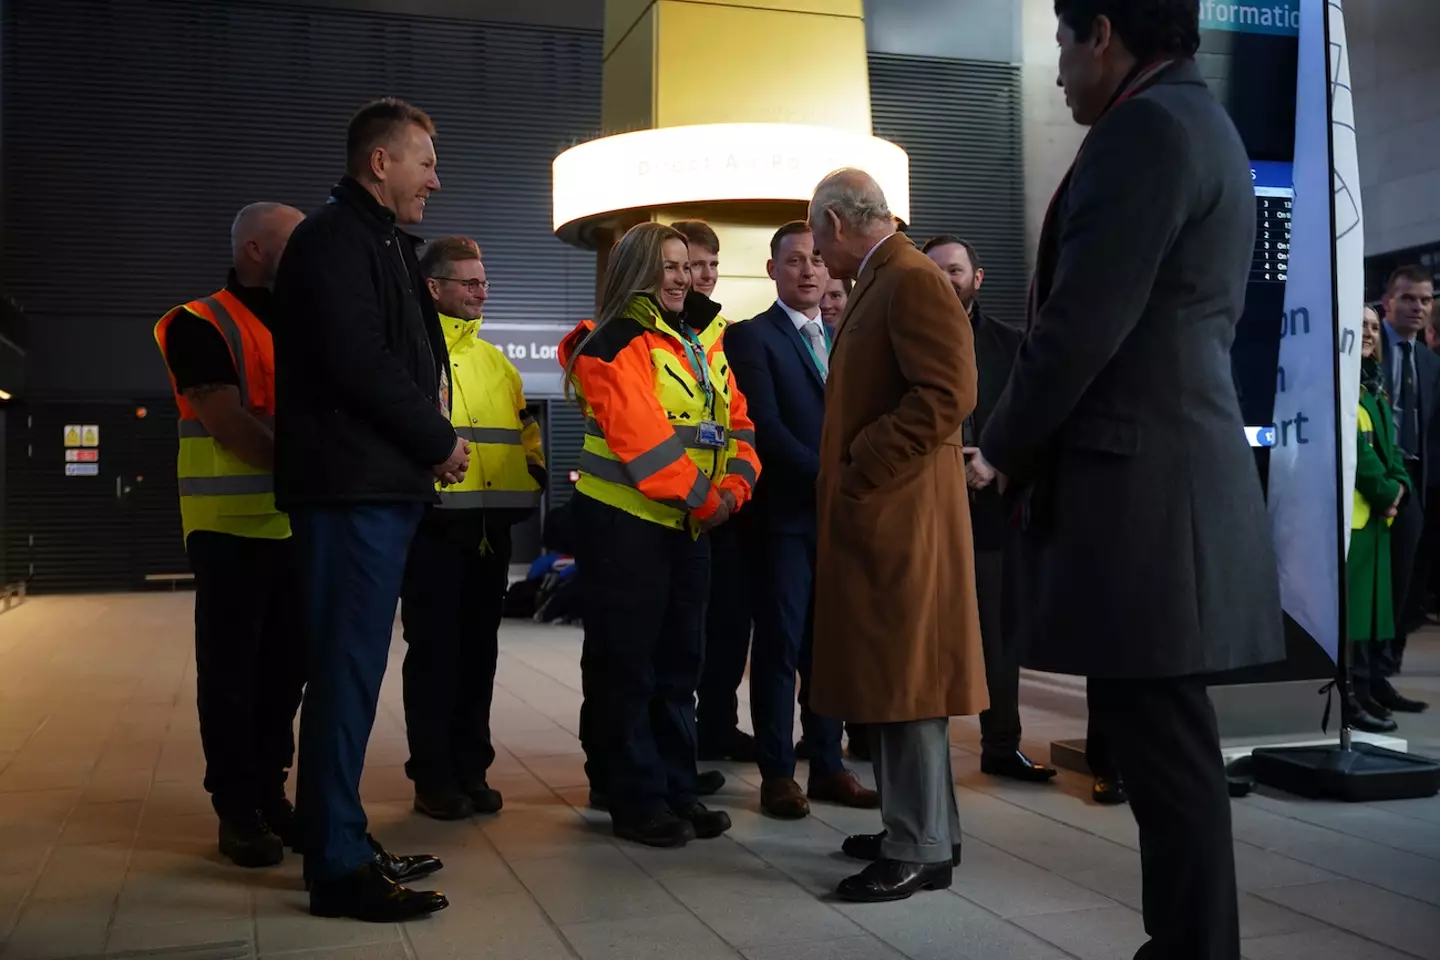 King Charles III met airport staff during a visit to Luton Airport.